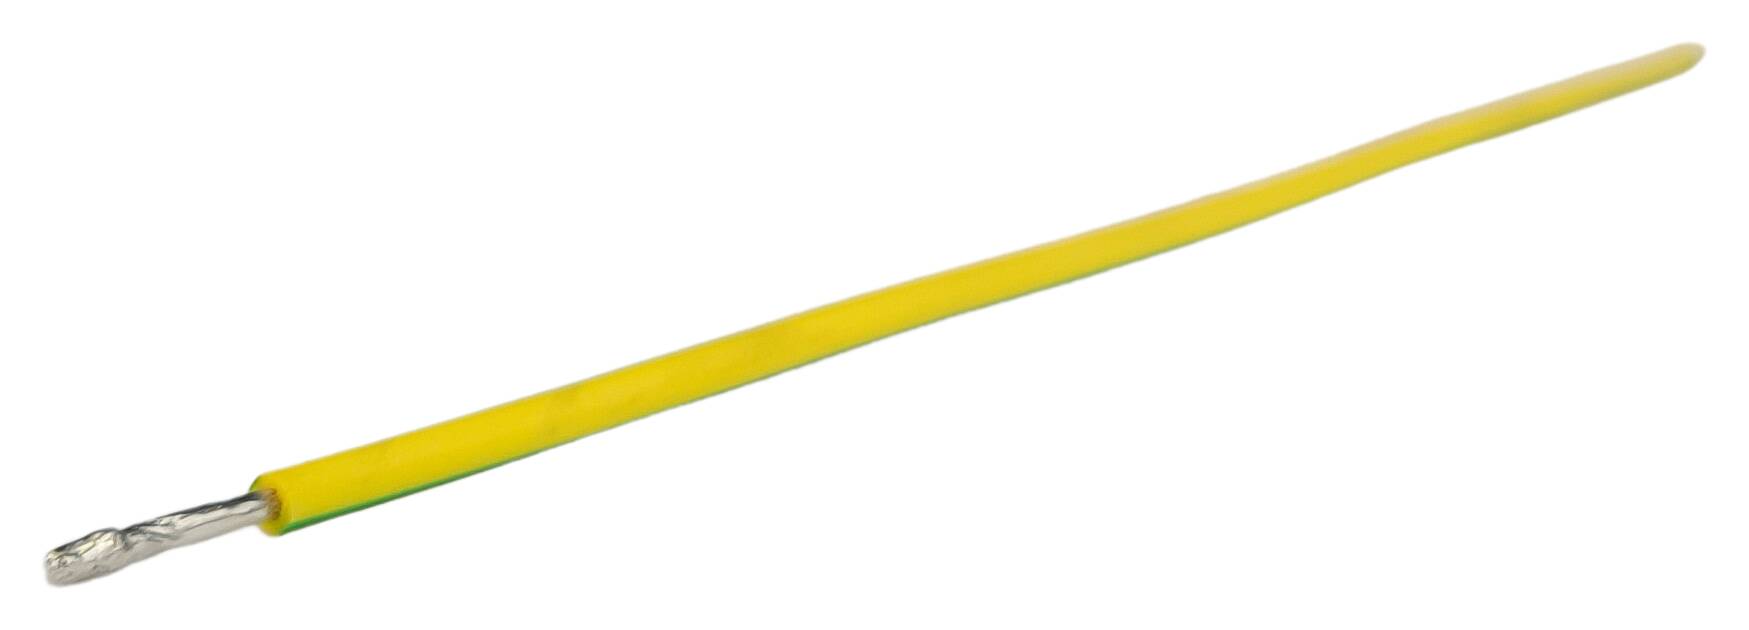 stranded wire cut 1x1,50 halogen-free 200 mm 11/11 twisted+tinned green-yellow